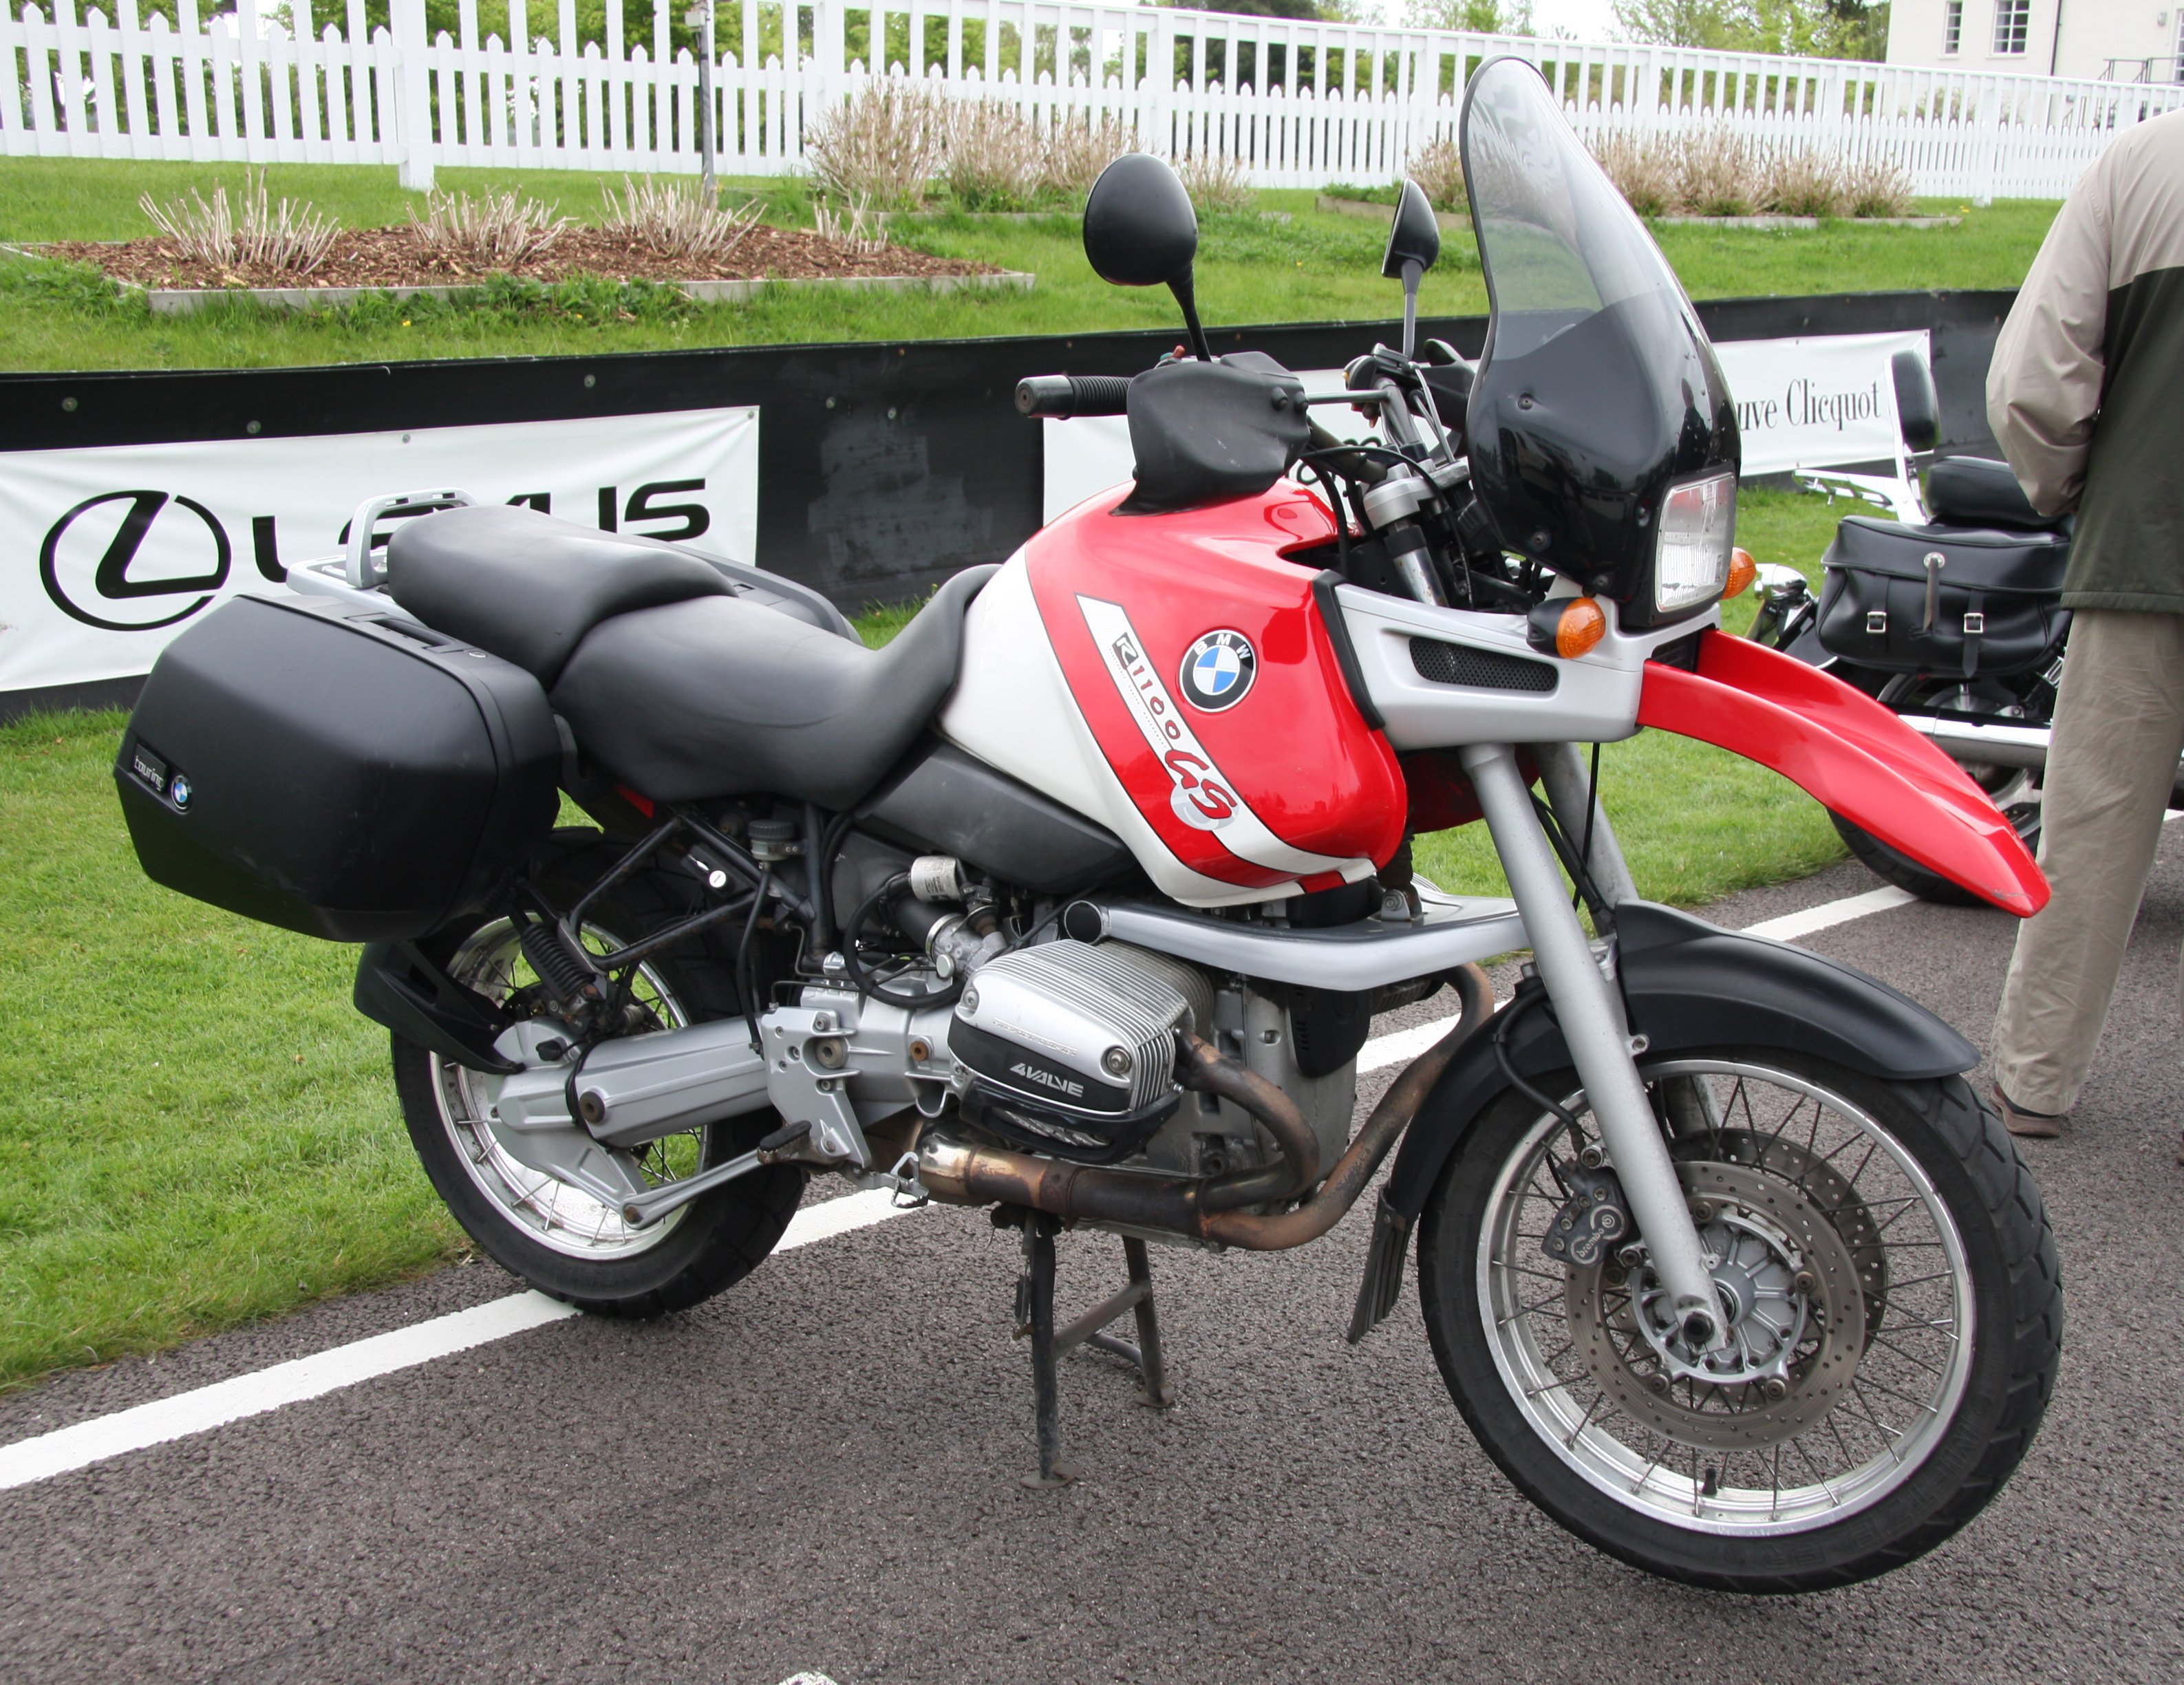 BMW_R1100GS_with_panniers.jpg